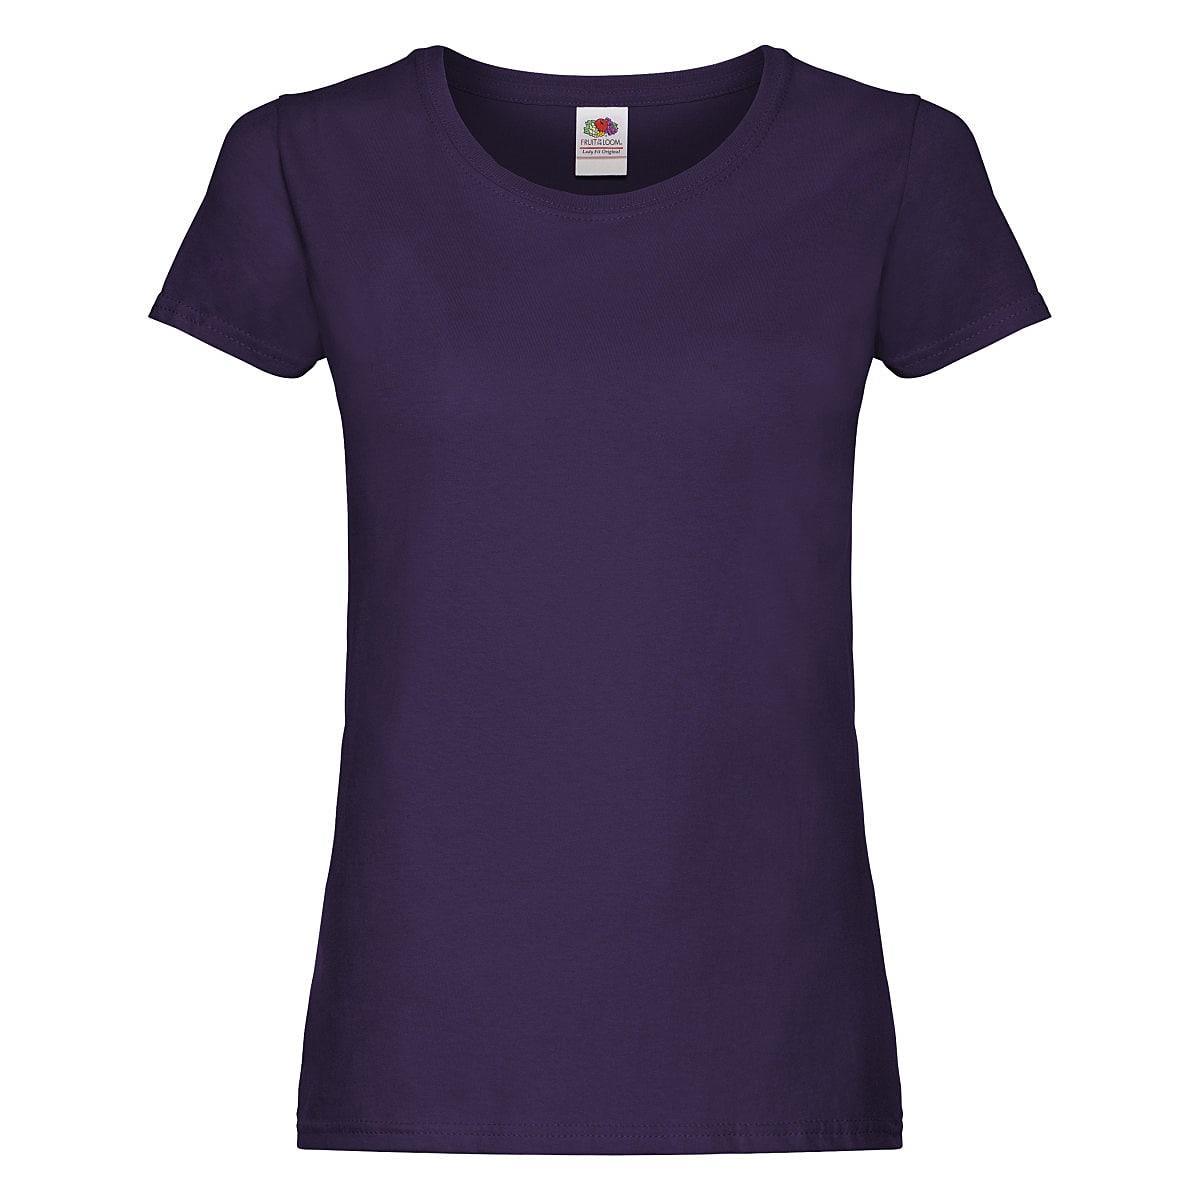 Fruit Of The Loom Lady Fit Original T-Shirt in Purple (Product Code: 61420)